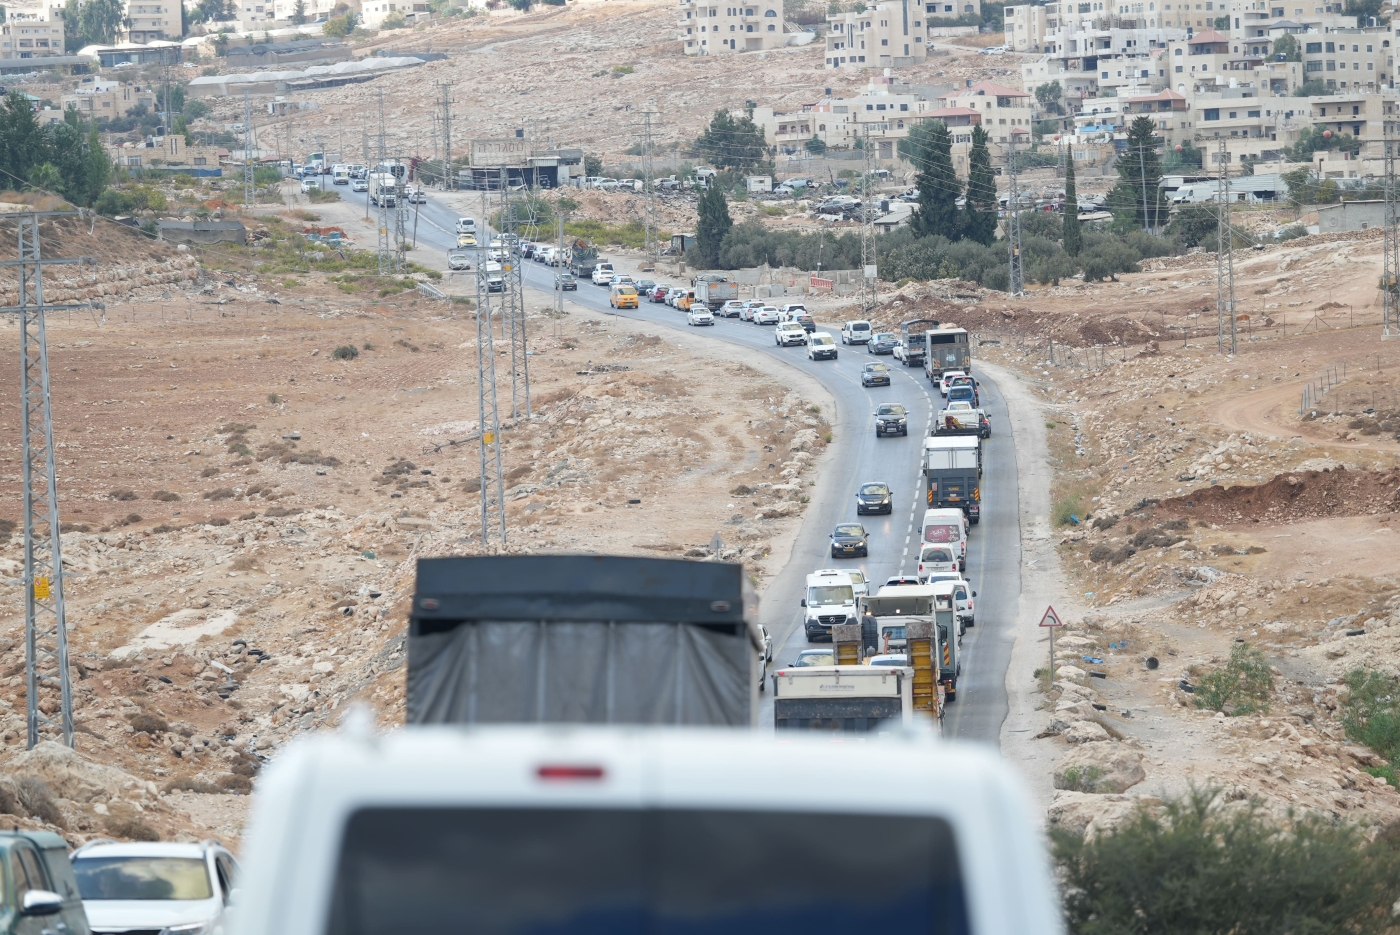 Traffic from the Nablus closures has caused backups at checkpoints further south in the West Bank, including near the Hizma checkpoint south of Ramallah (MEE/Akram al-Waara)